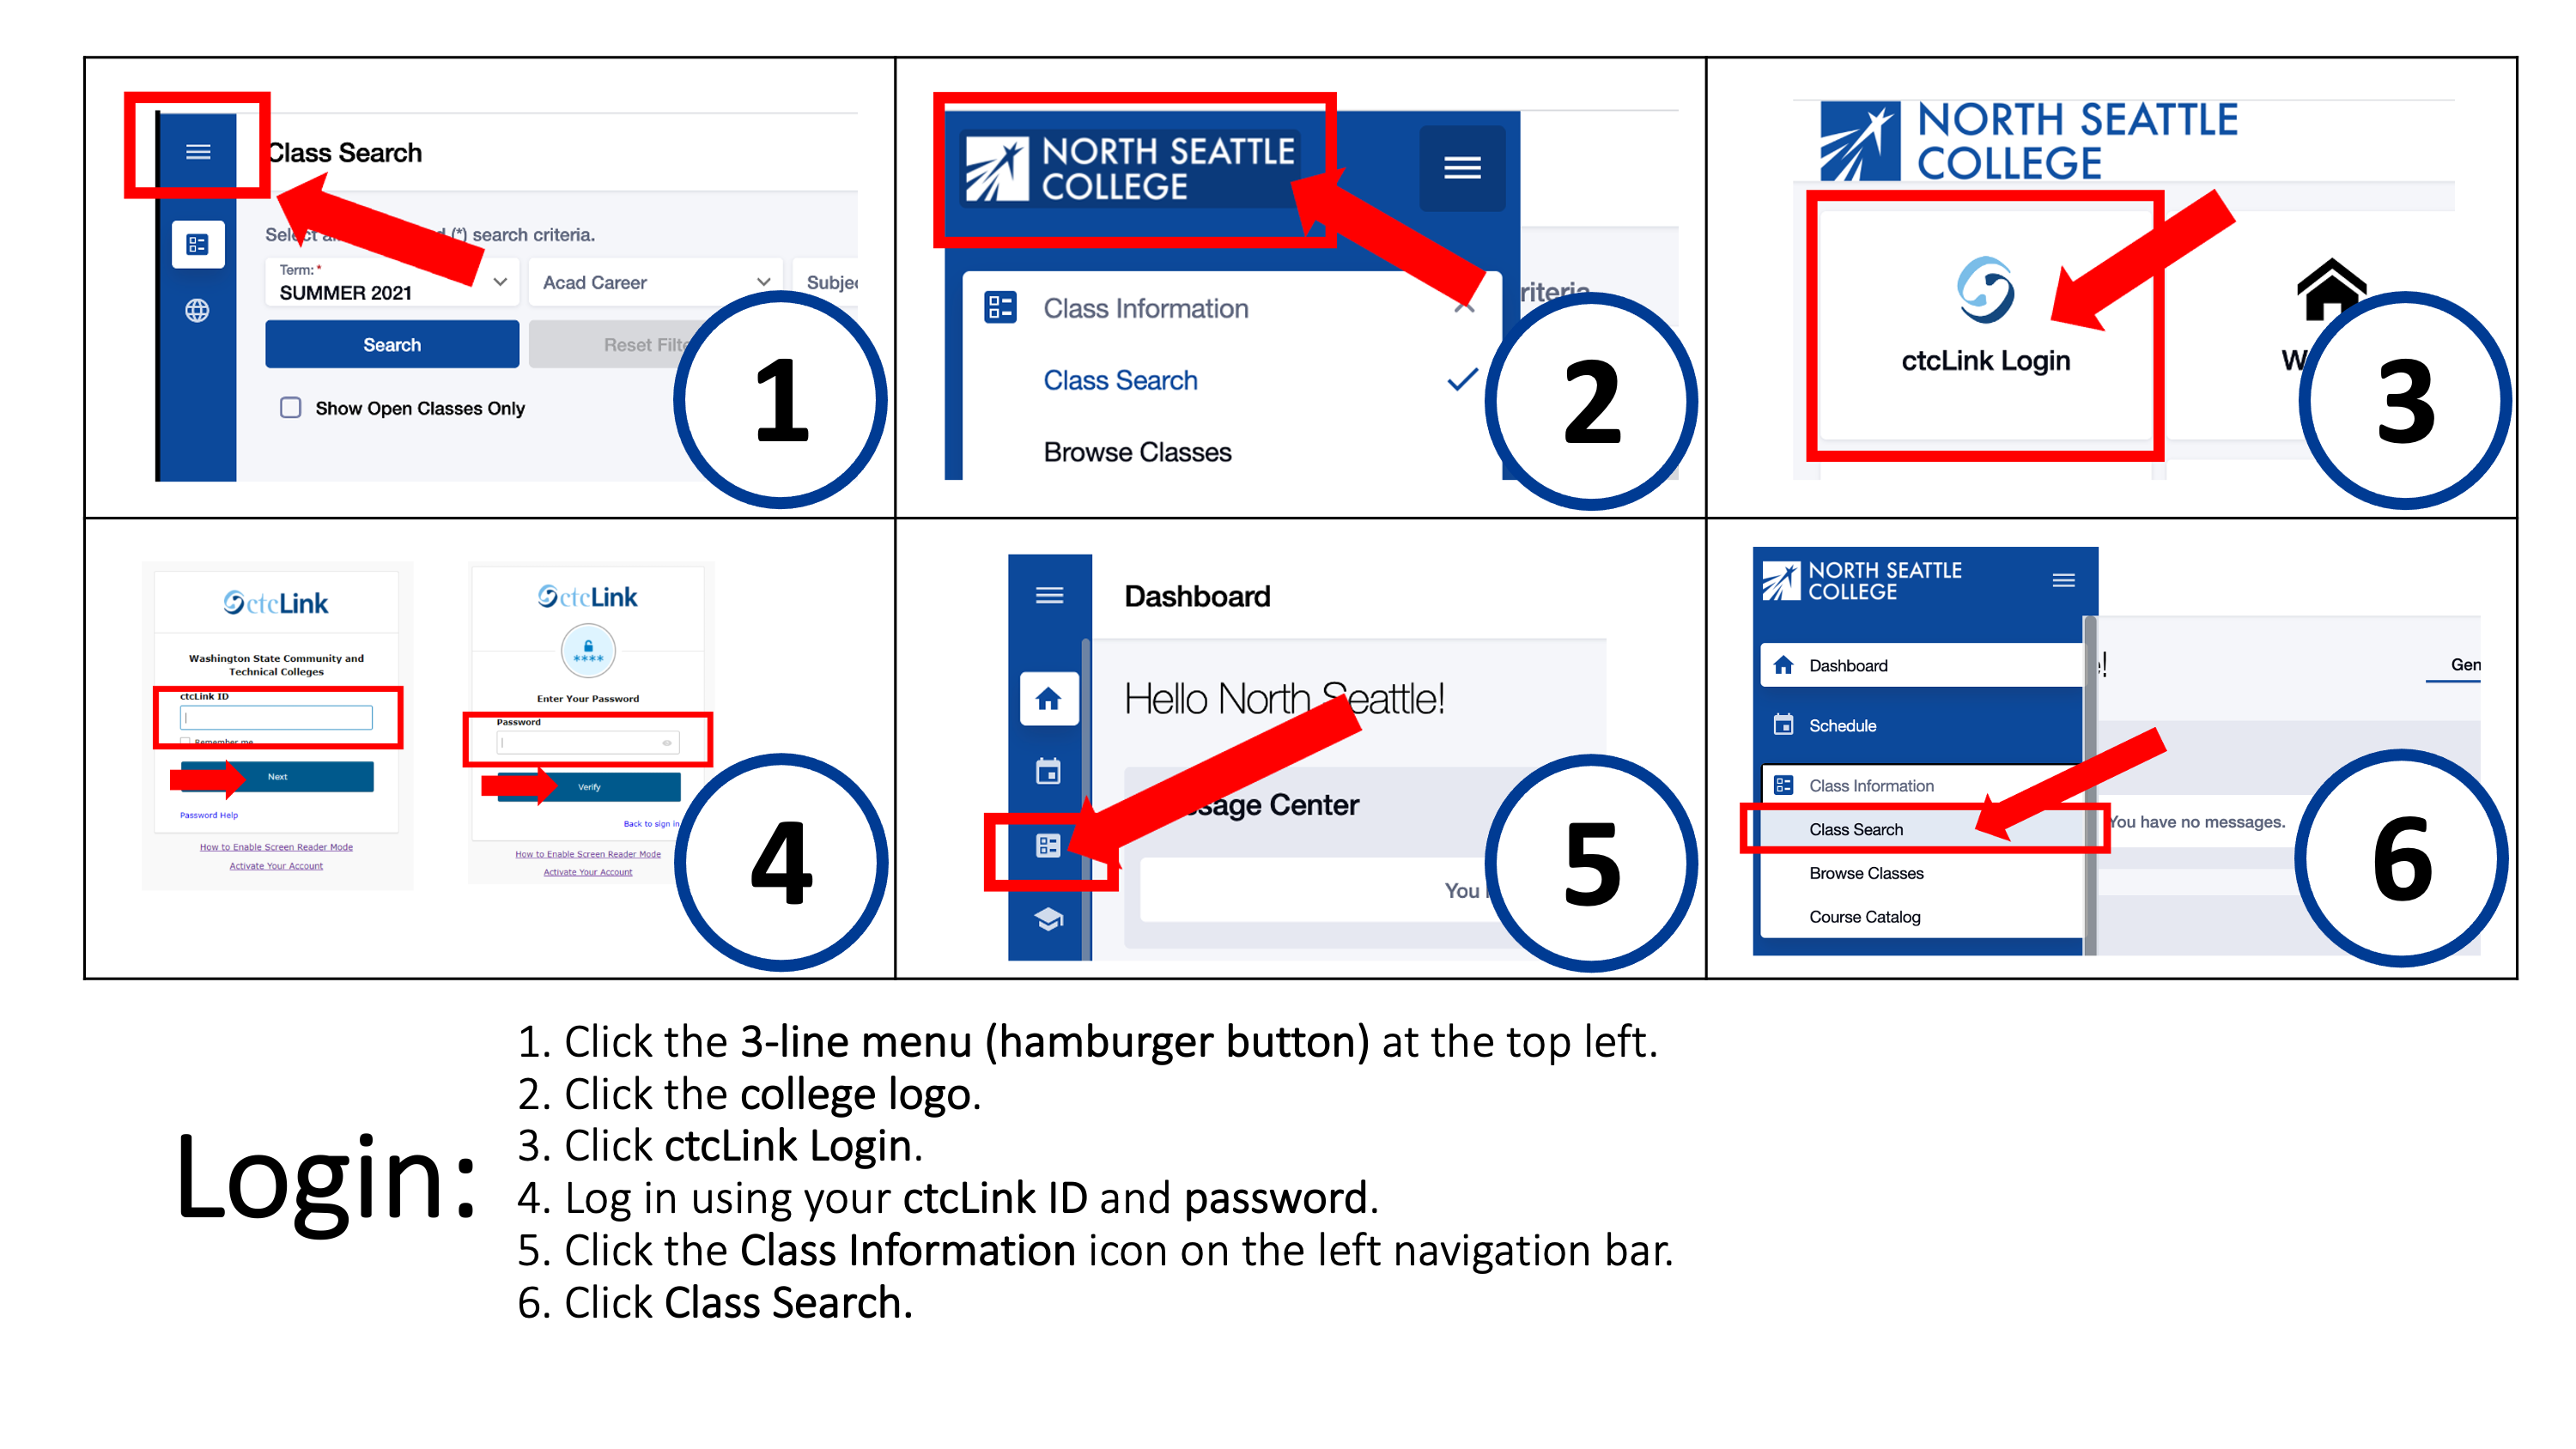 Login: 1. Click the 3-line menu (hamburger button) at the top left. 2. Click the college logo. 3. Click ctcLink Login. 4. Log in using your ctcLink ID and password. 5. Click the Class Information icon on the left navigation bar. 6. Click Class Search. 